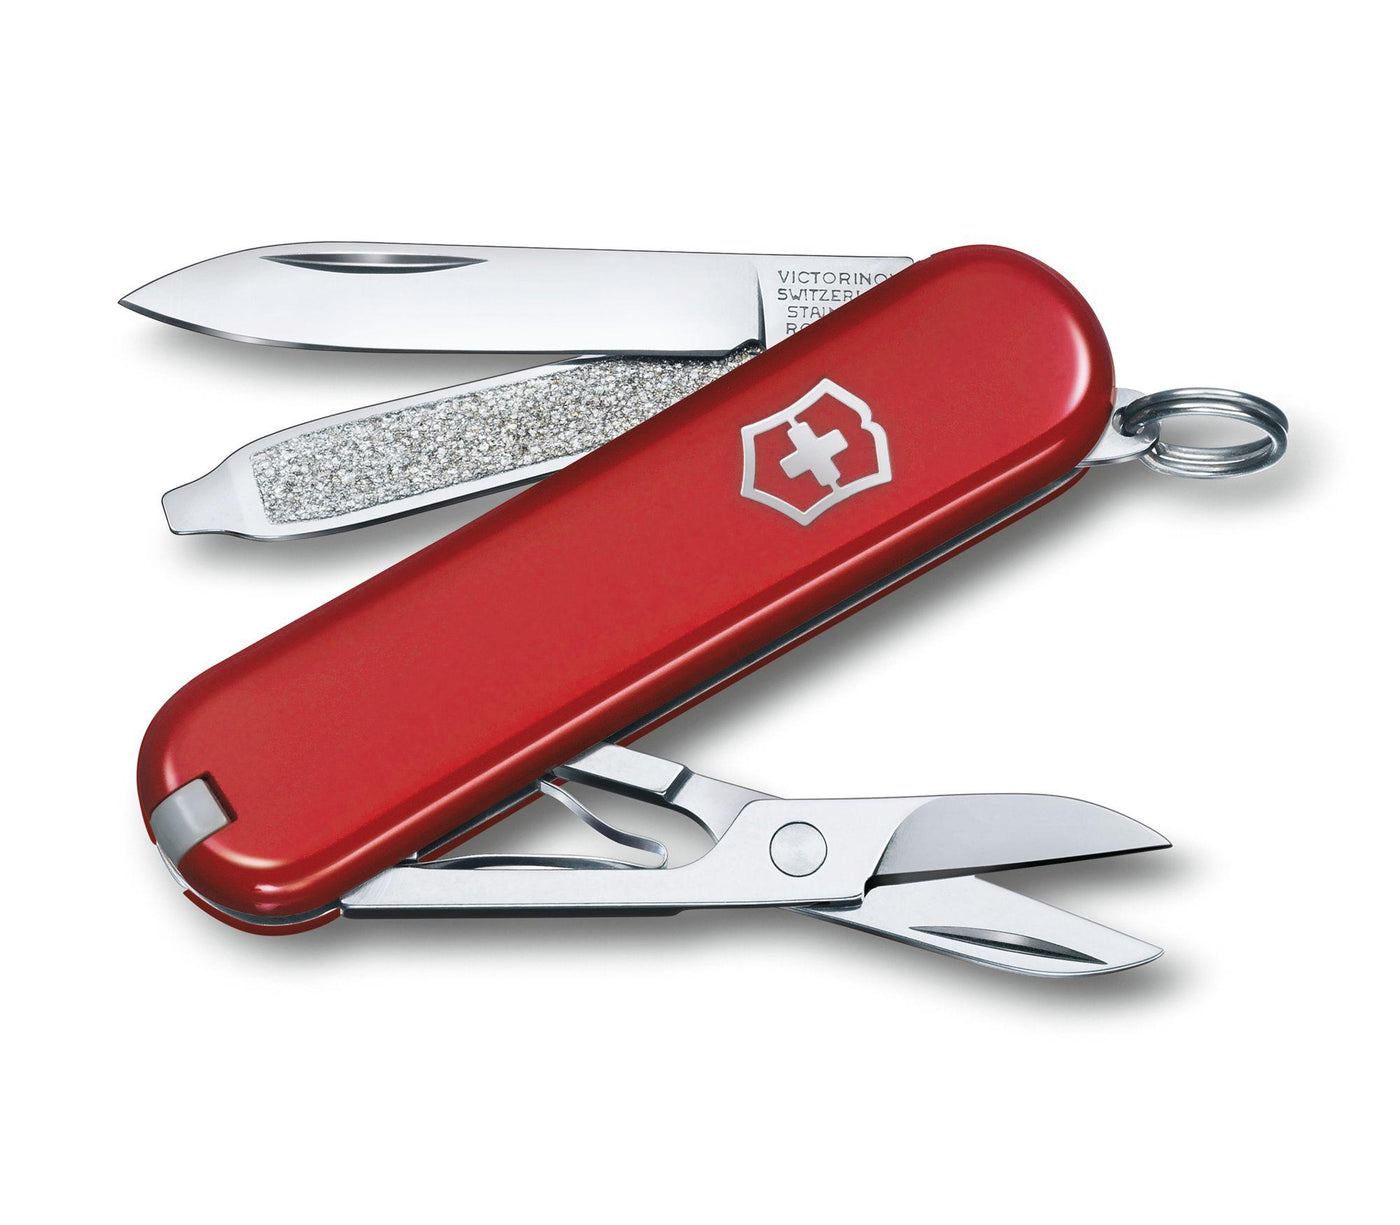 Victorinox Classic SD Knife (Blister Pack)